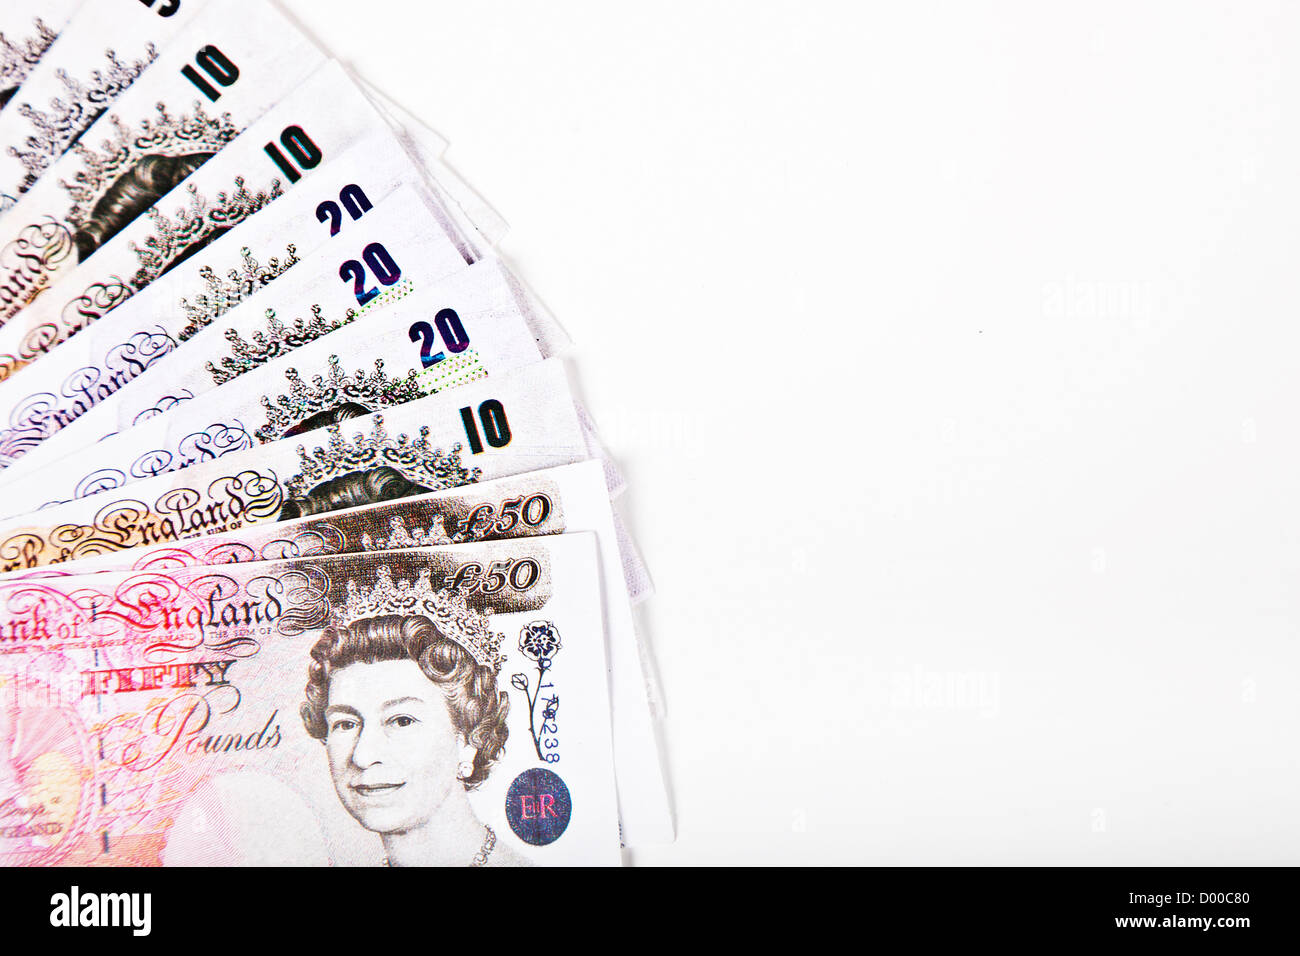 Group of pound notes against white background Stock Photo